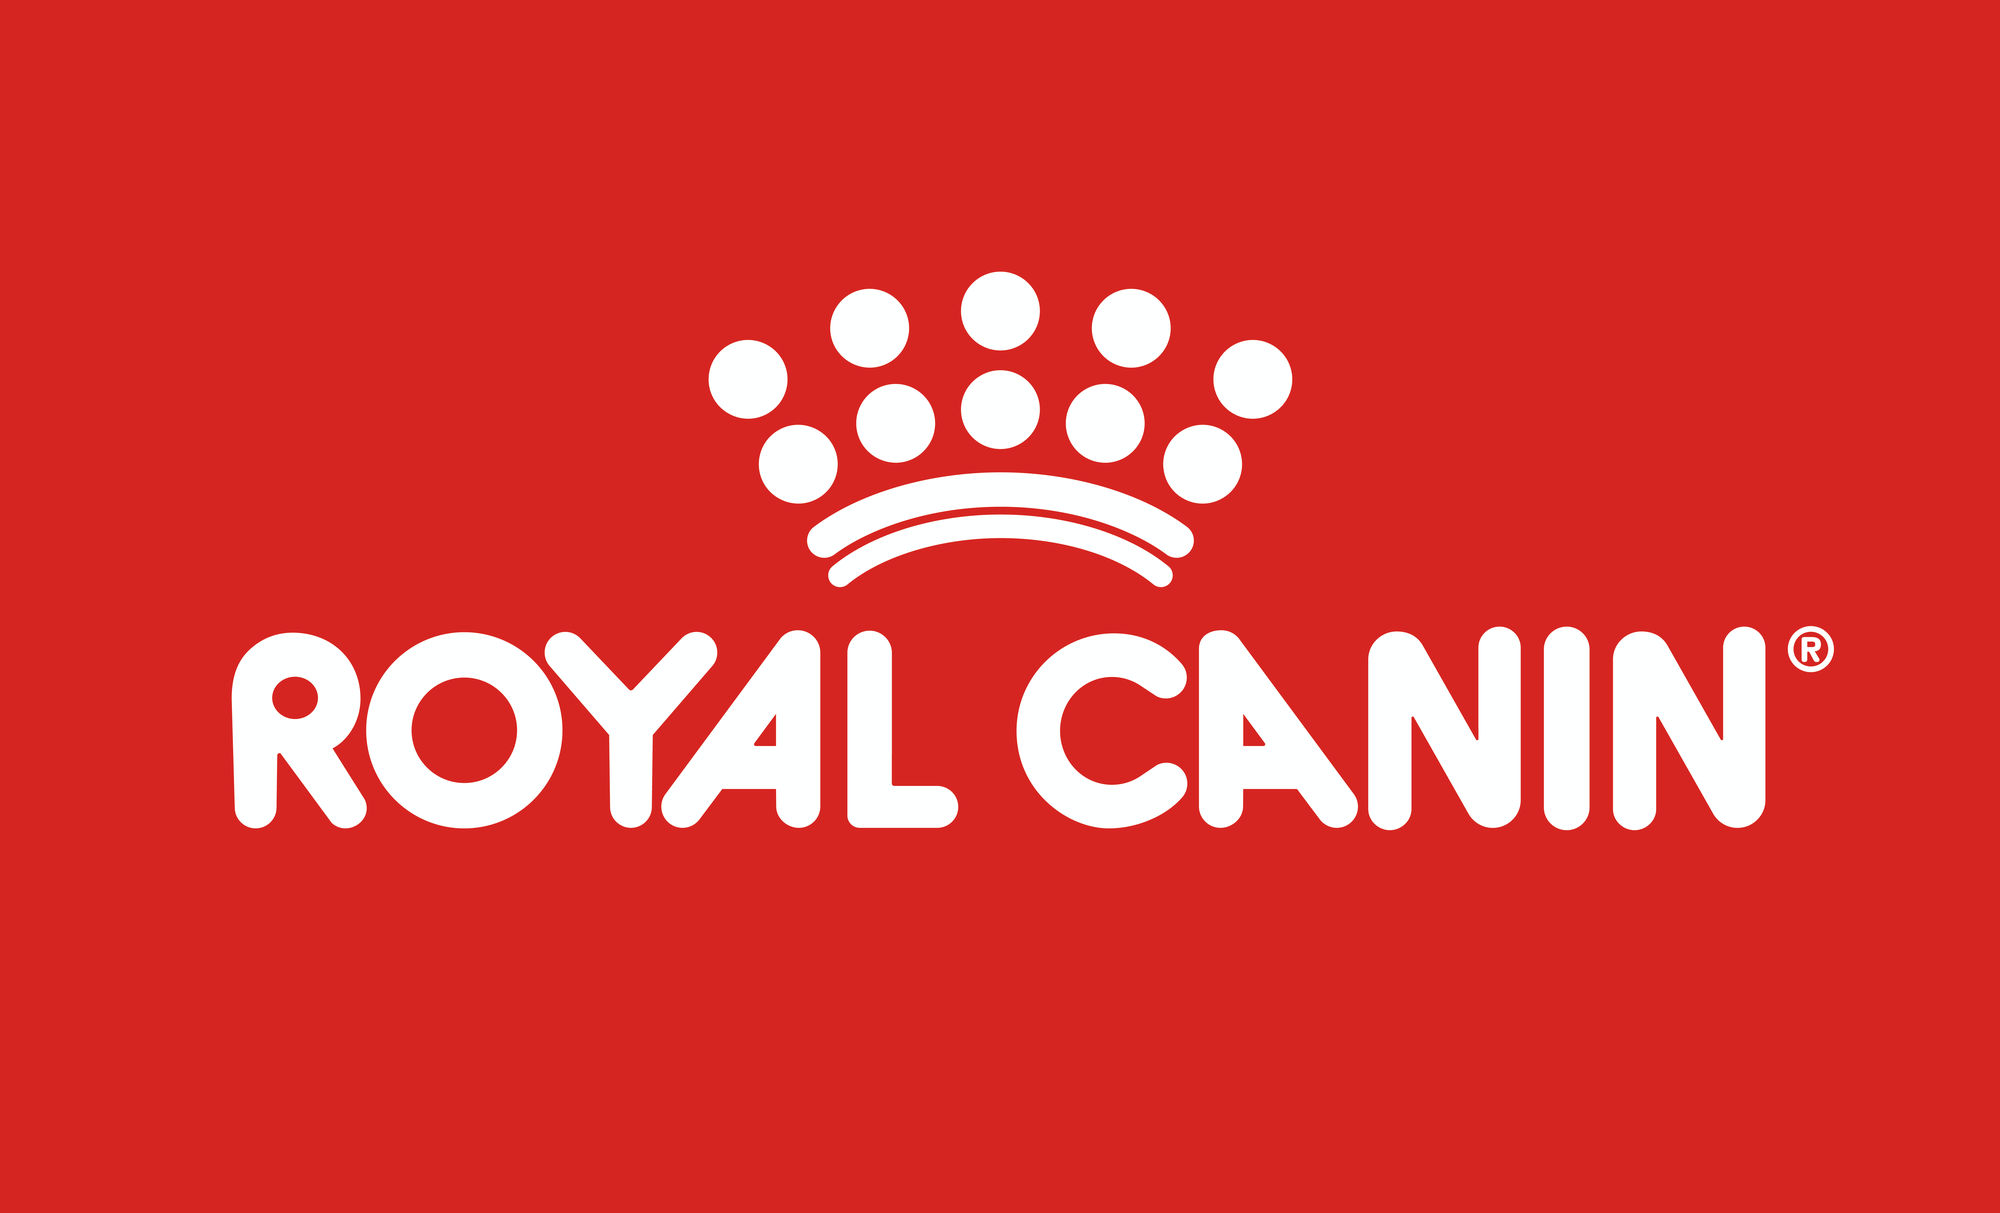 Mission Statement for the “Royal Canin” Company